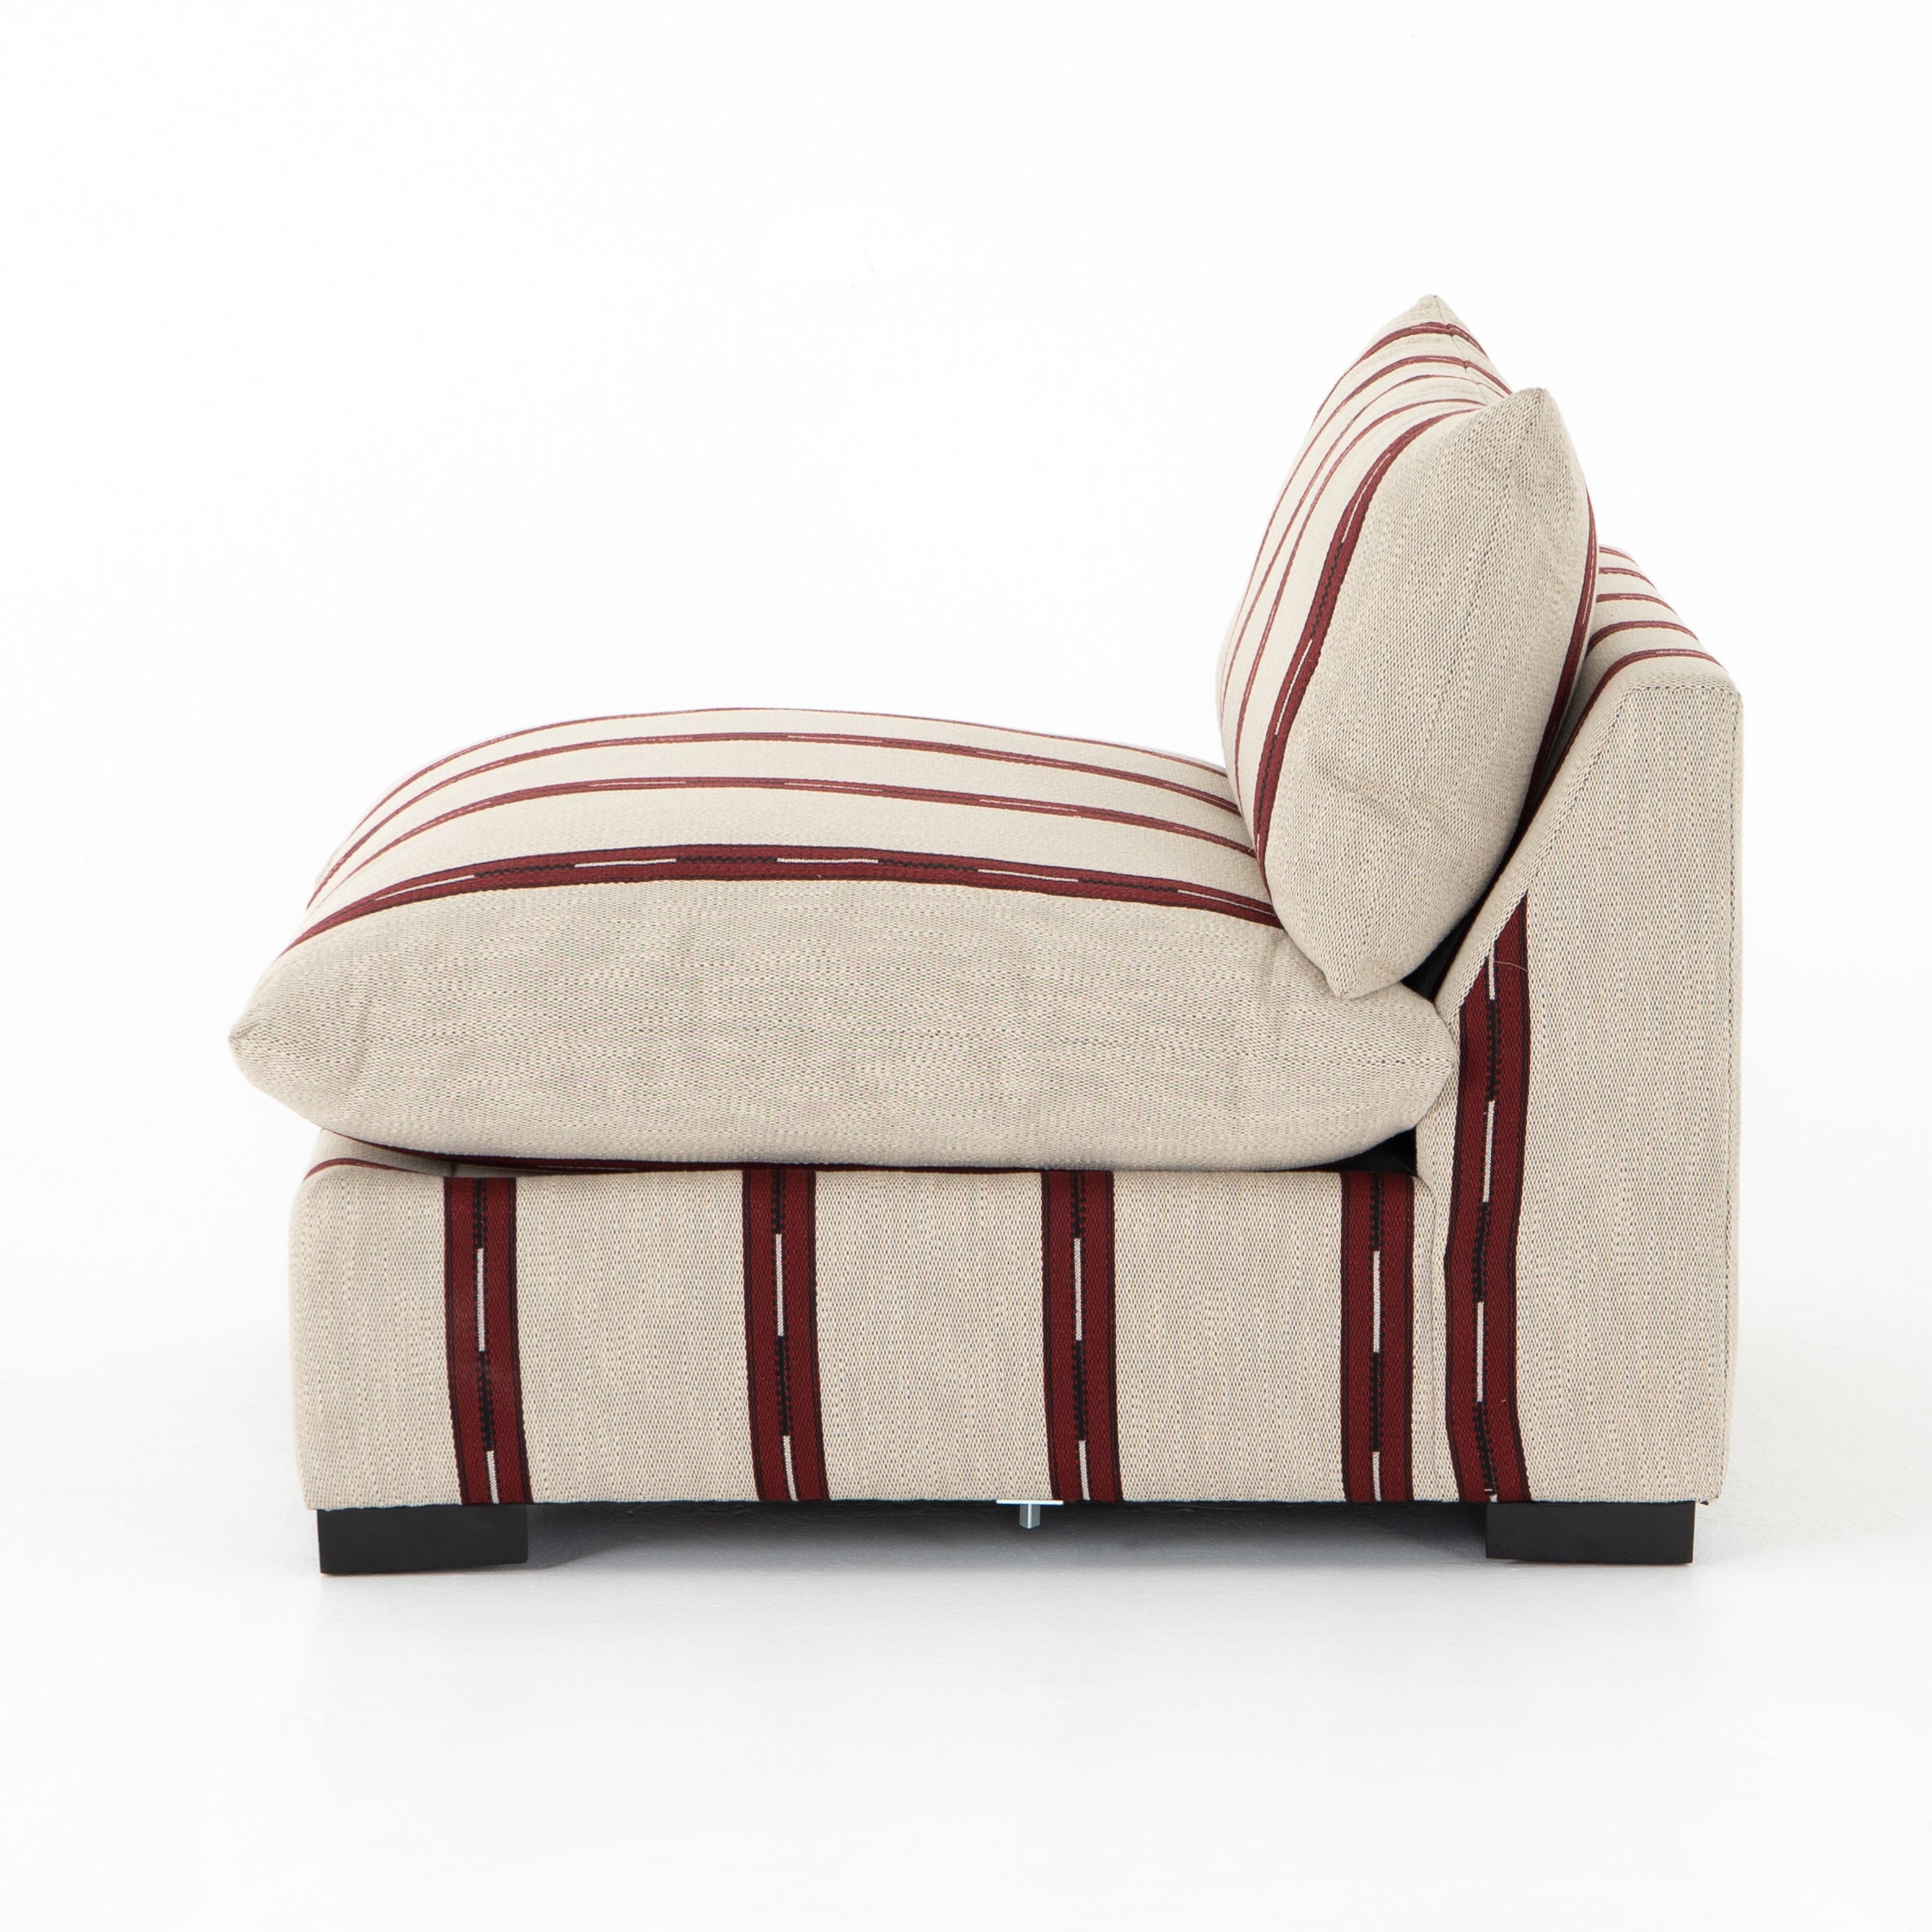 Zella Garnet Fabric with Distressed Natural Pine | Grant Chair | Valley Ridge Furniture